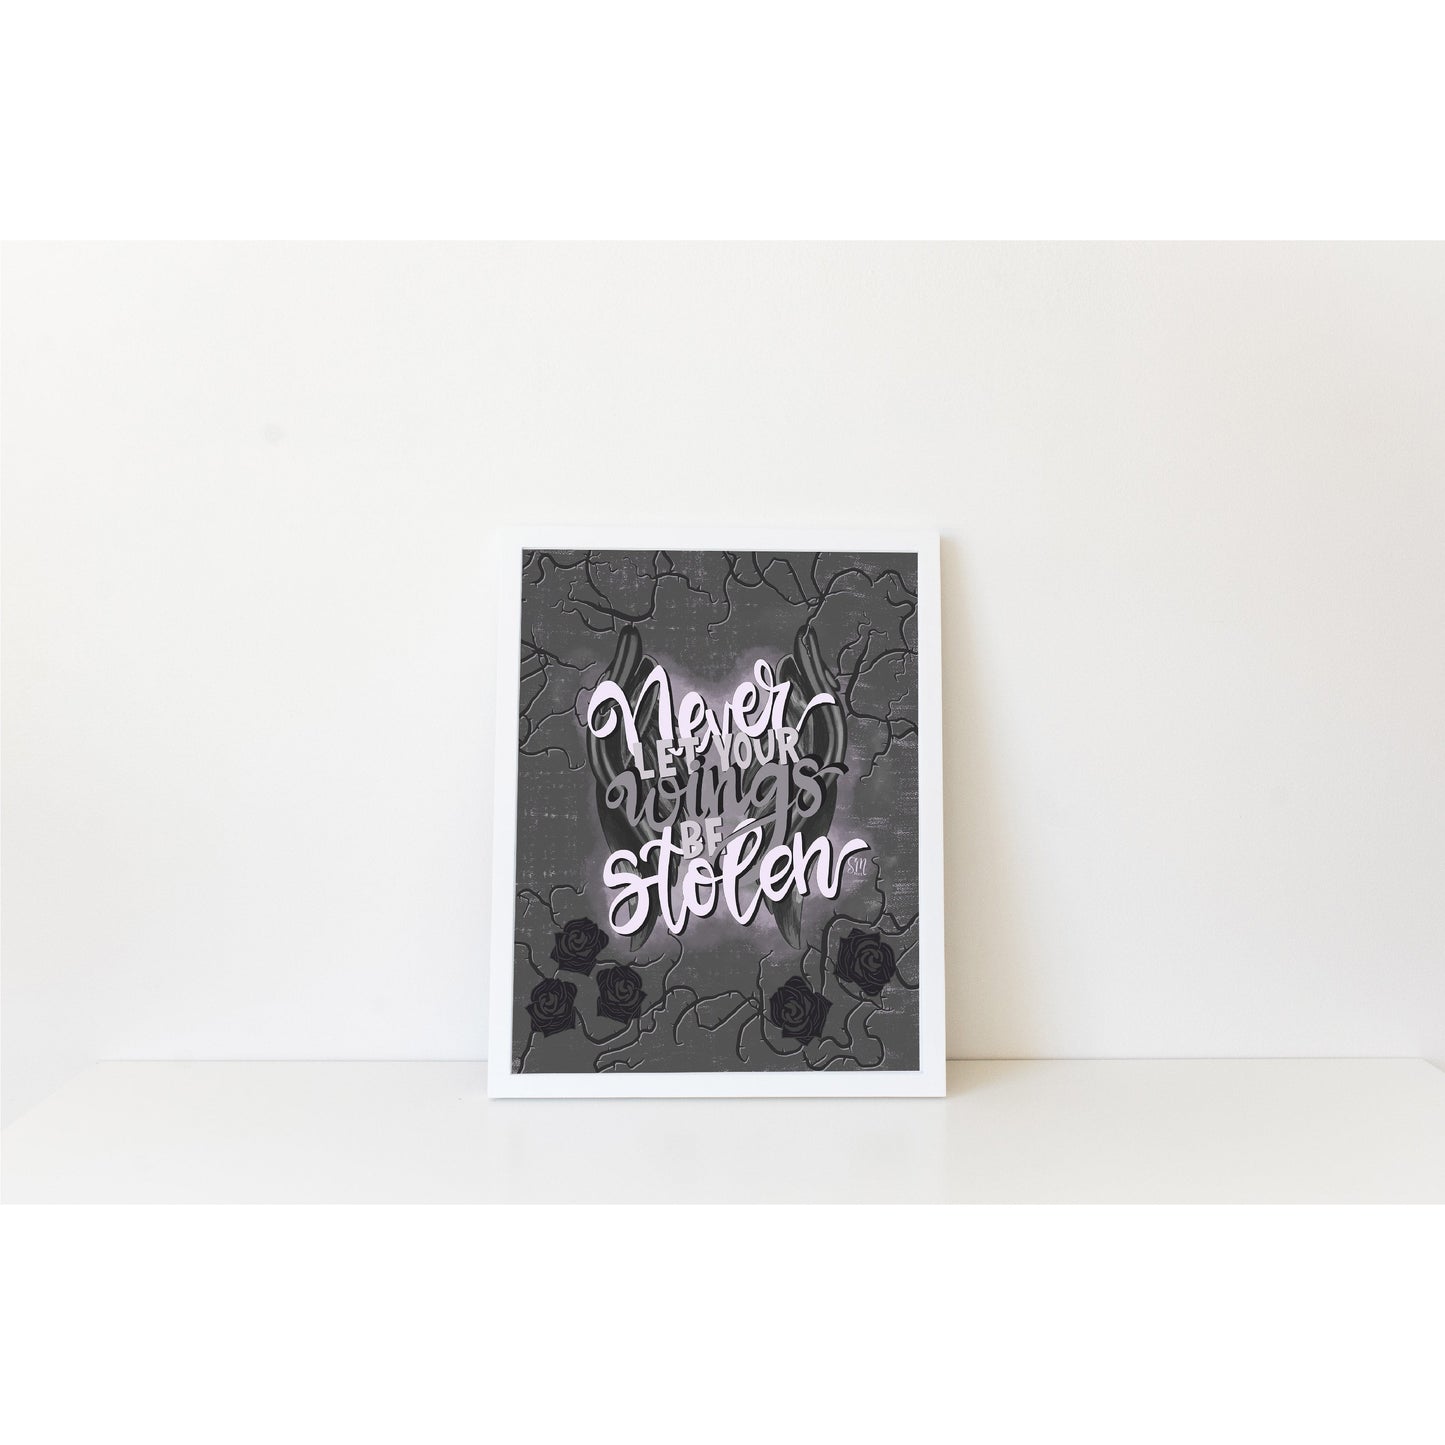 Maleficent Quote - Never Let Your Wings Be Stolen - Print - Wall Art - 8x10